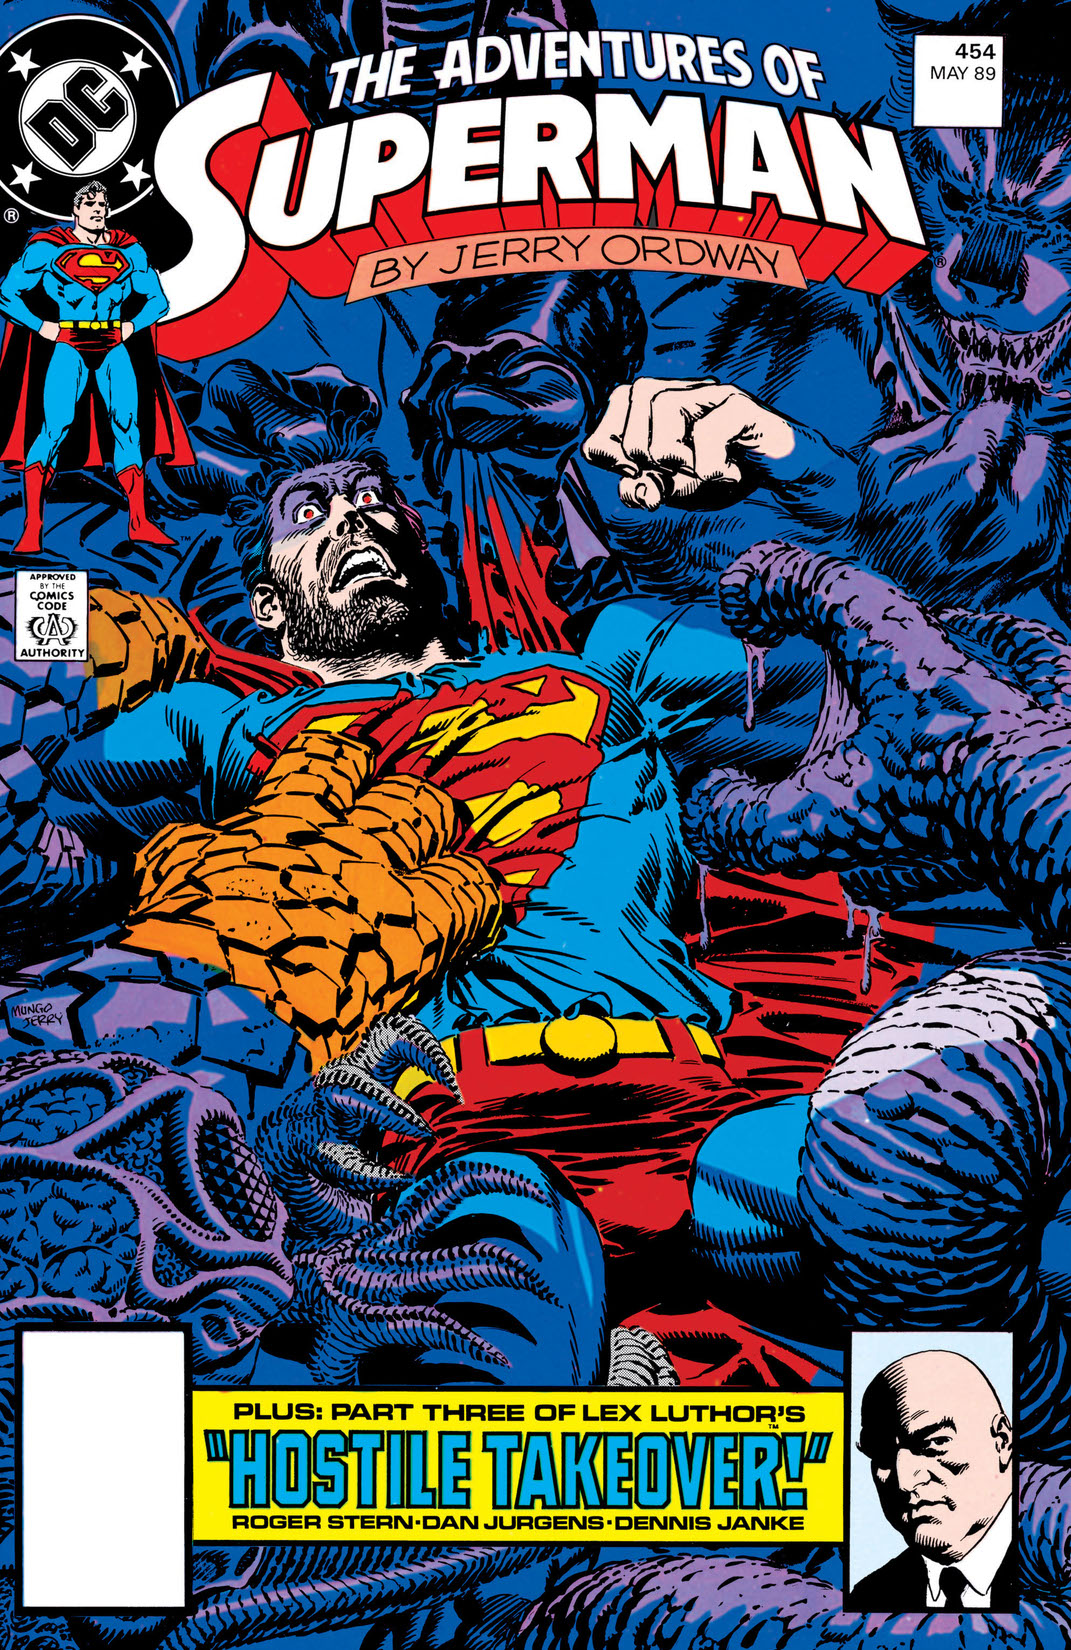 Adventures of Superman (1987-) #454 preview images